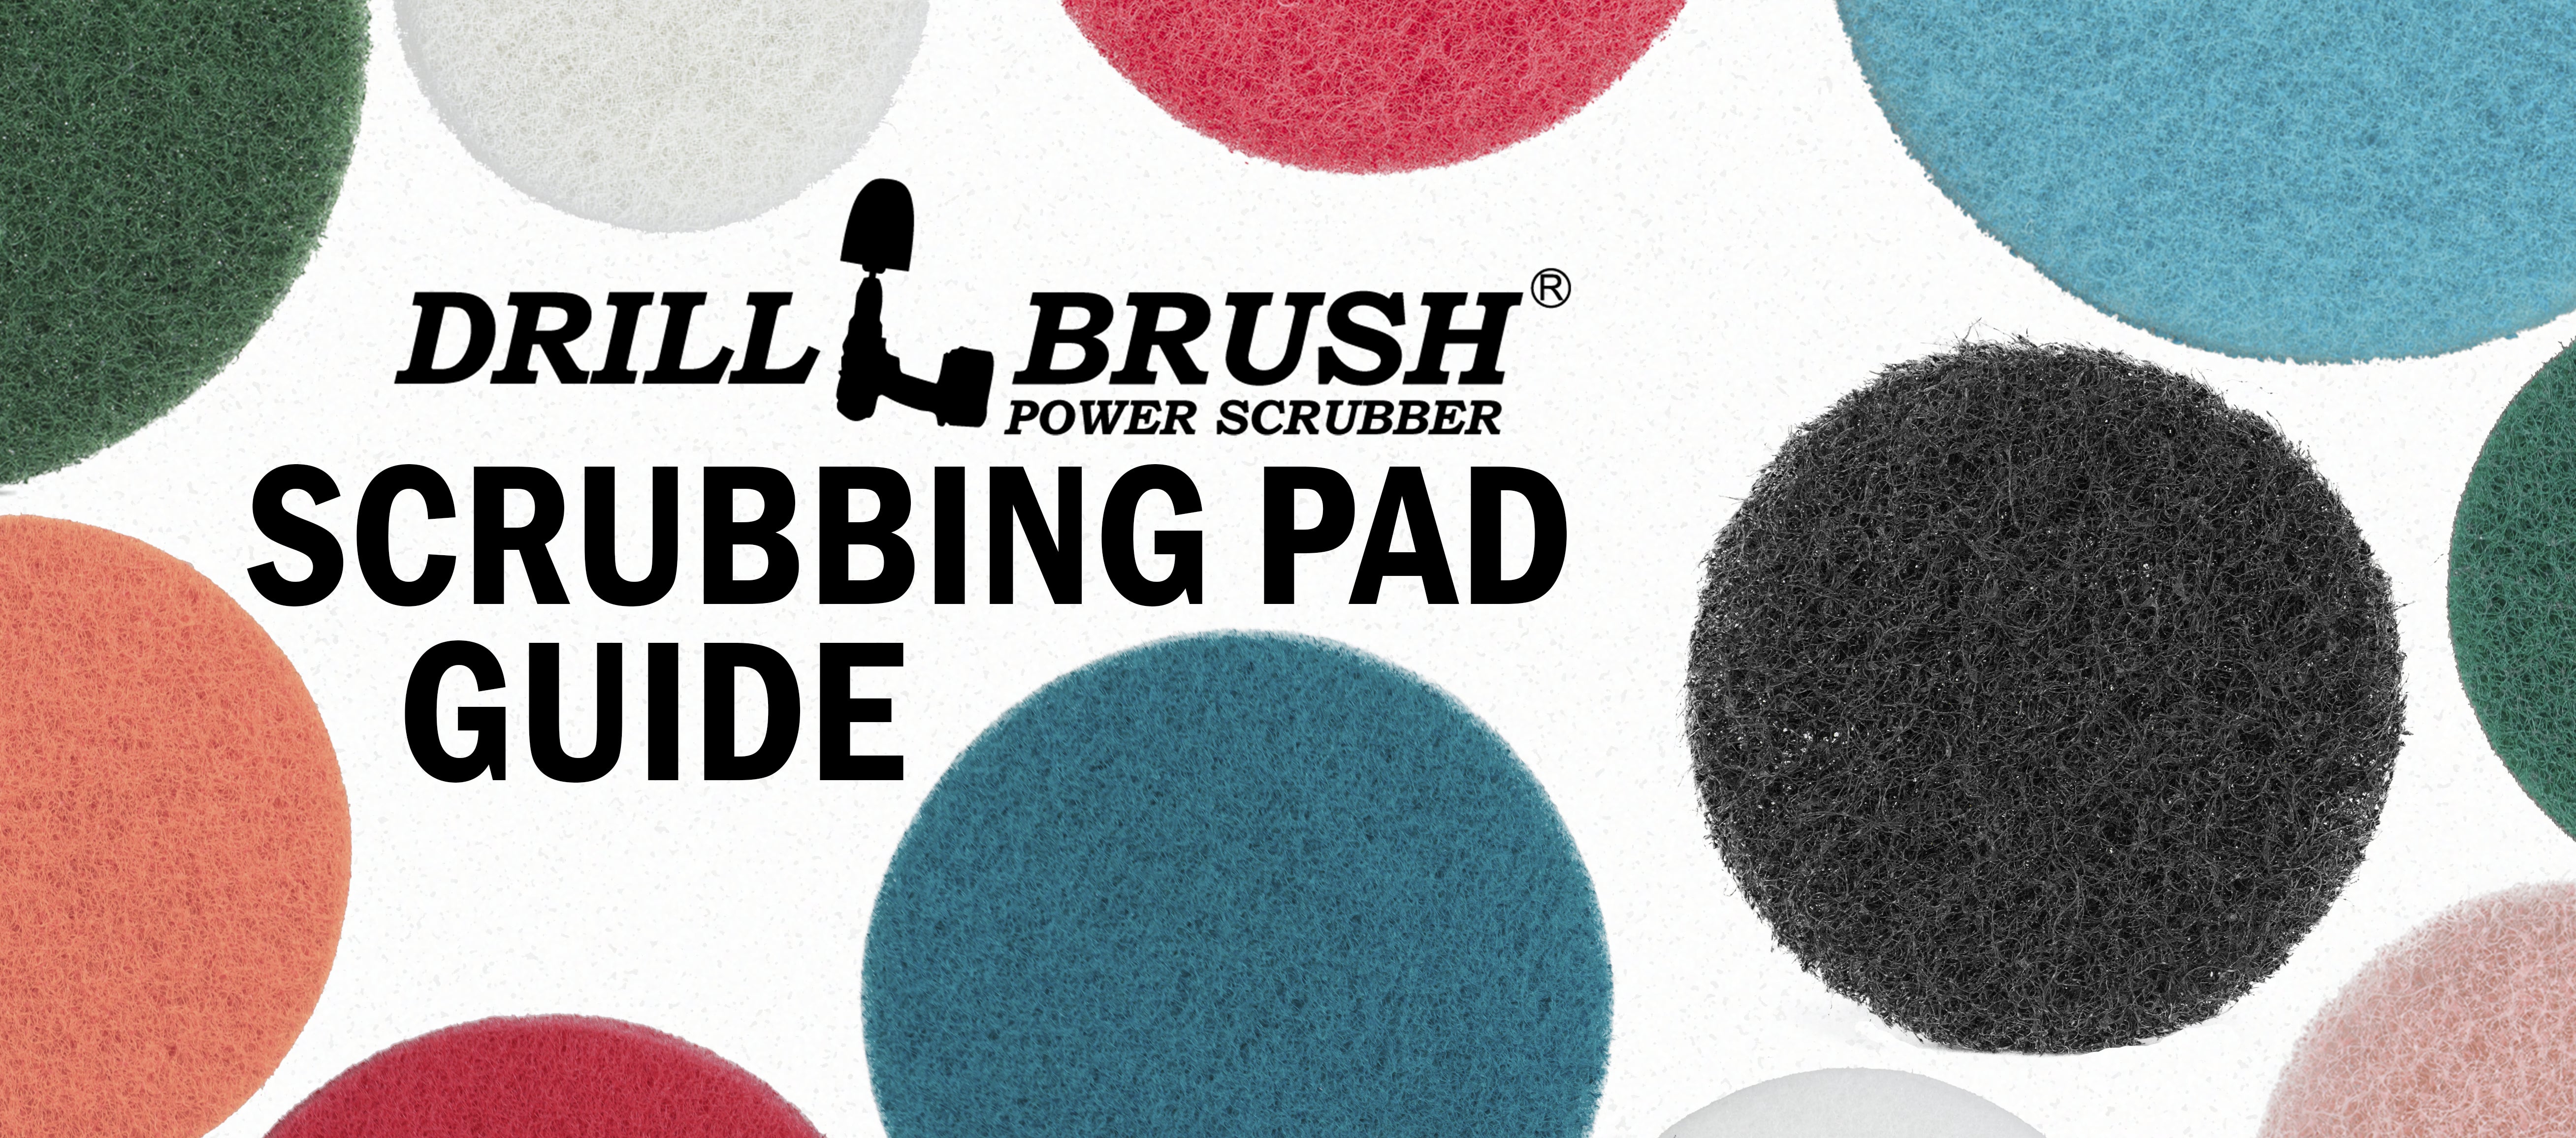 Everything You Need to Know About Drill-Powered Scrubbing Pads